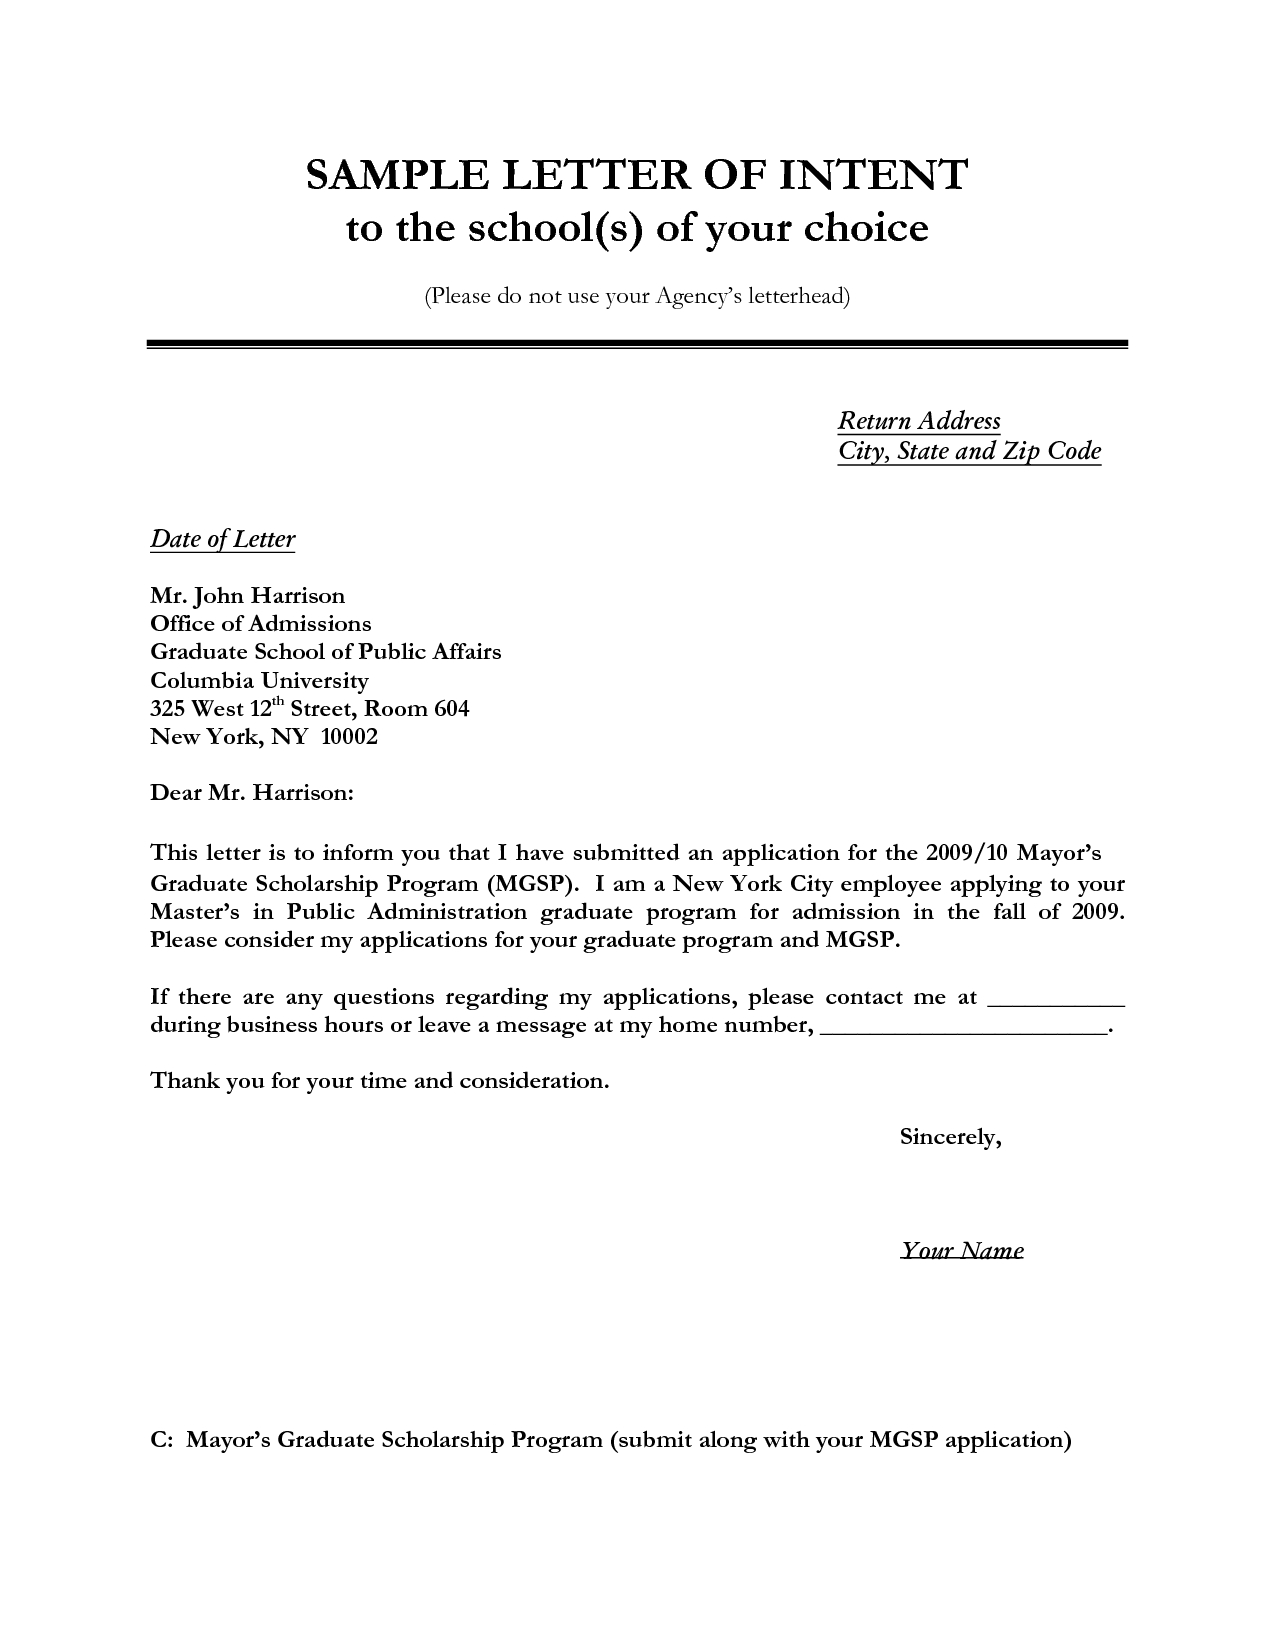 renters-insurance-letter-template-examples-letter-template-collection